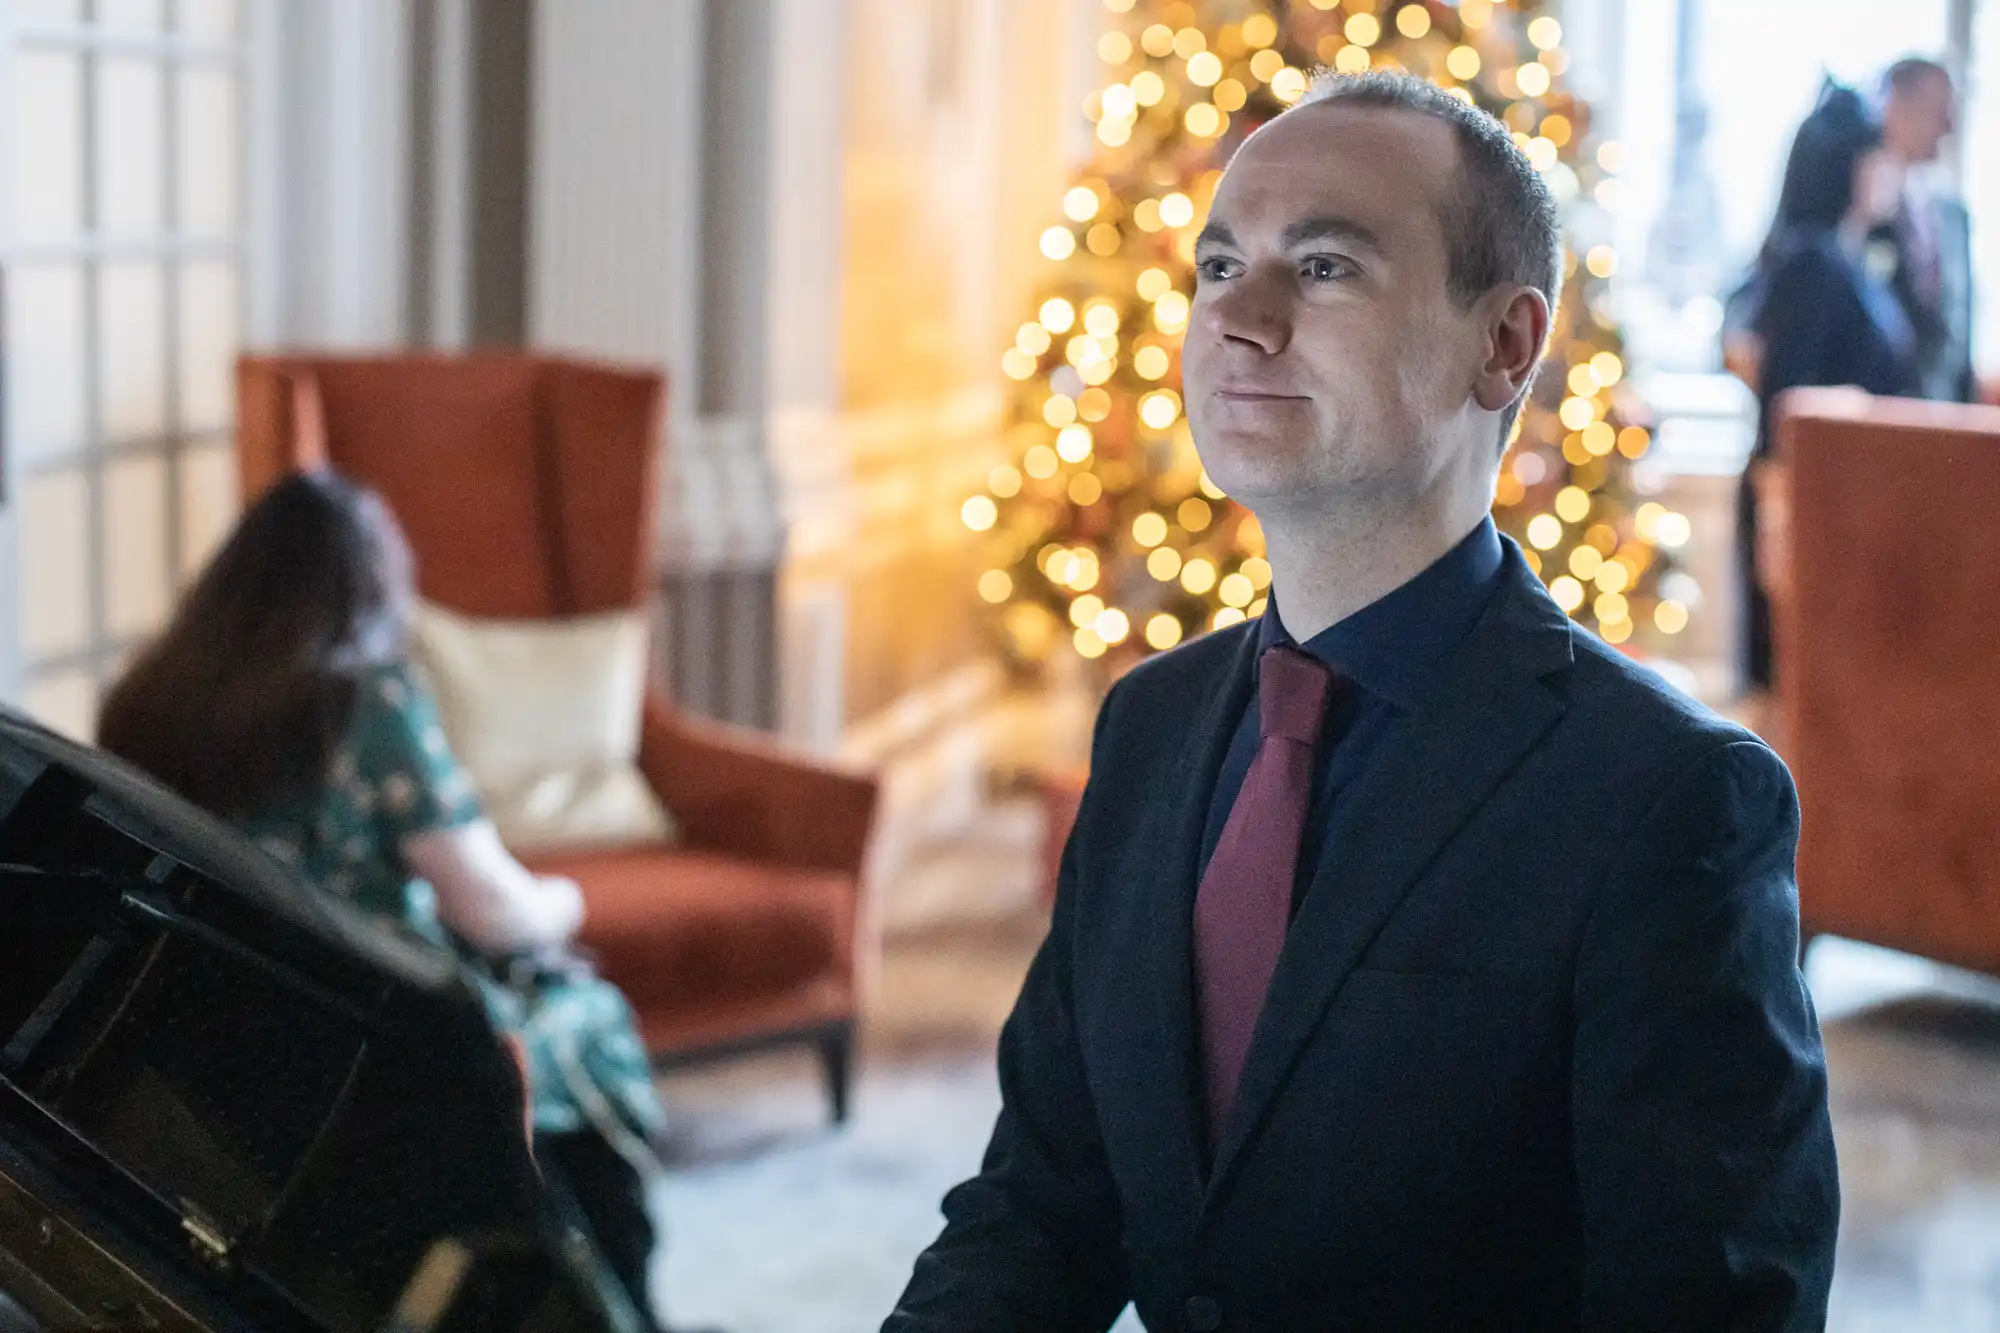 A man in formal attire stands indoors near a grand piano with a decorated Christmas tree in the background.